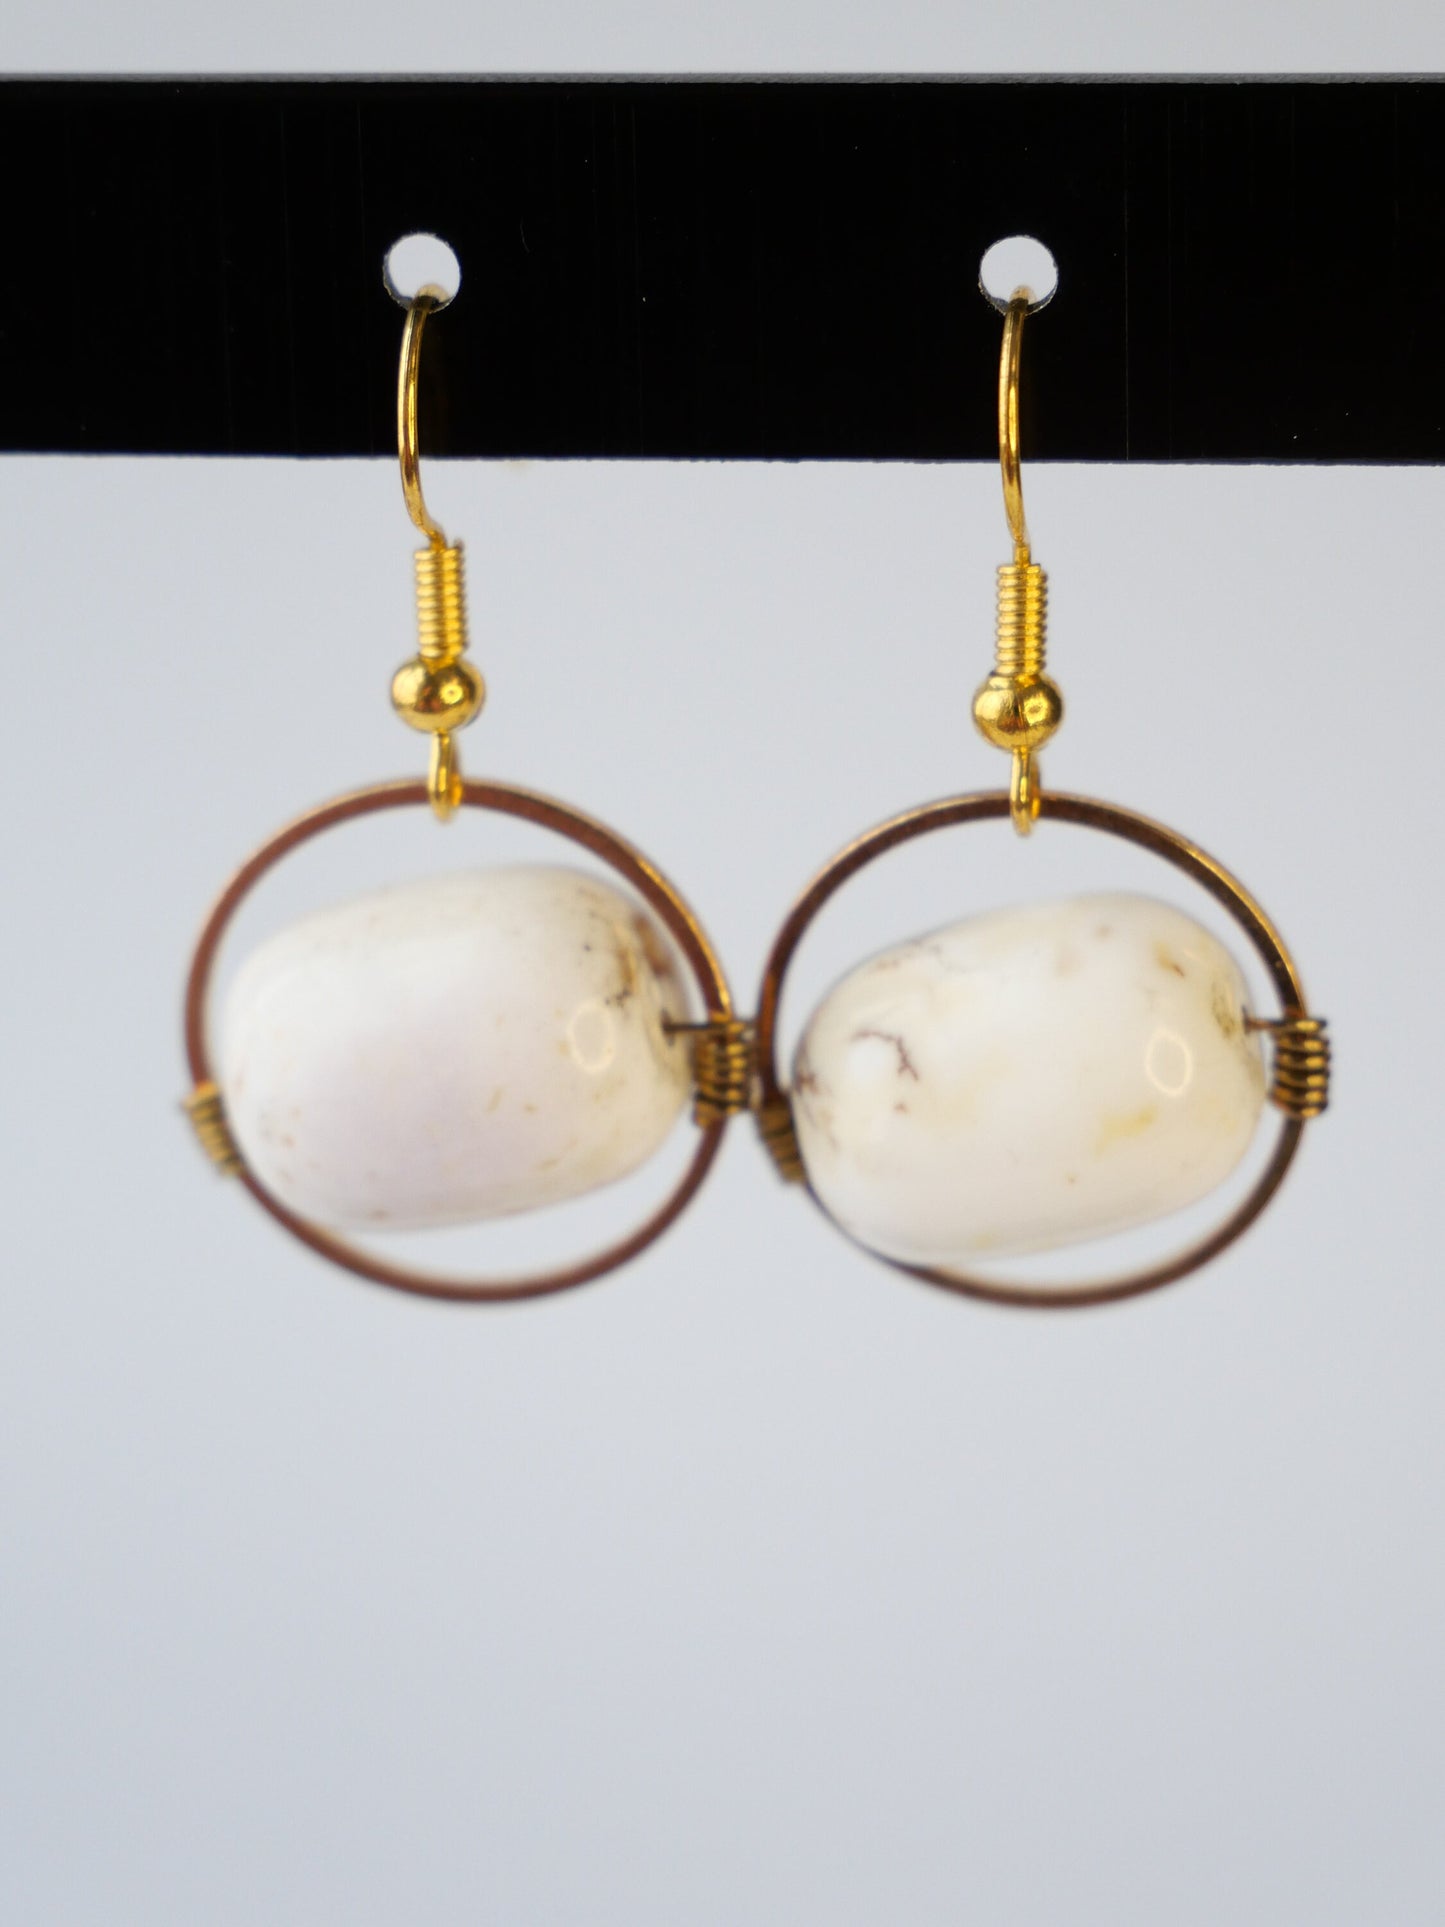 Gold, Geometric, Pink Magnesite Dangle Earrings, Hypoallergenic, Made in Maine, Inspired by Maine